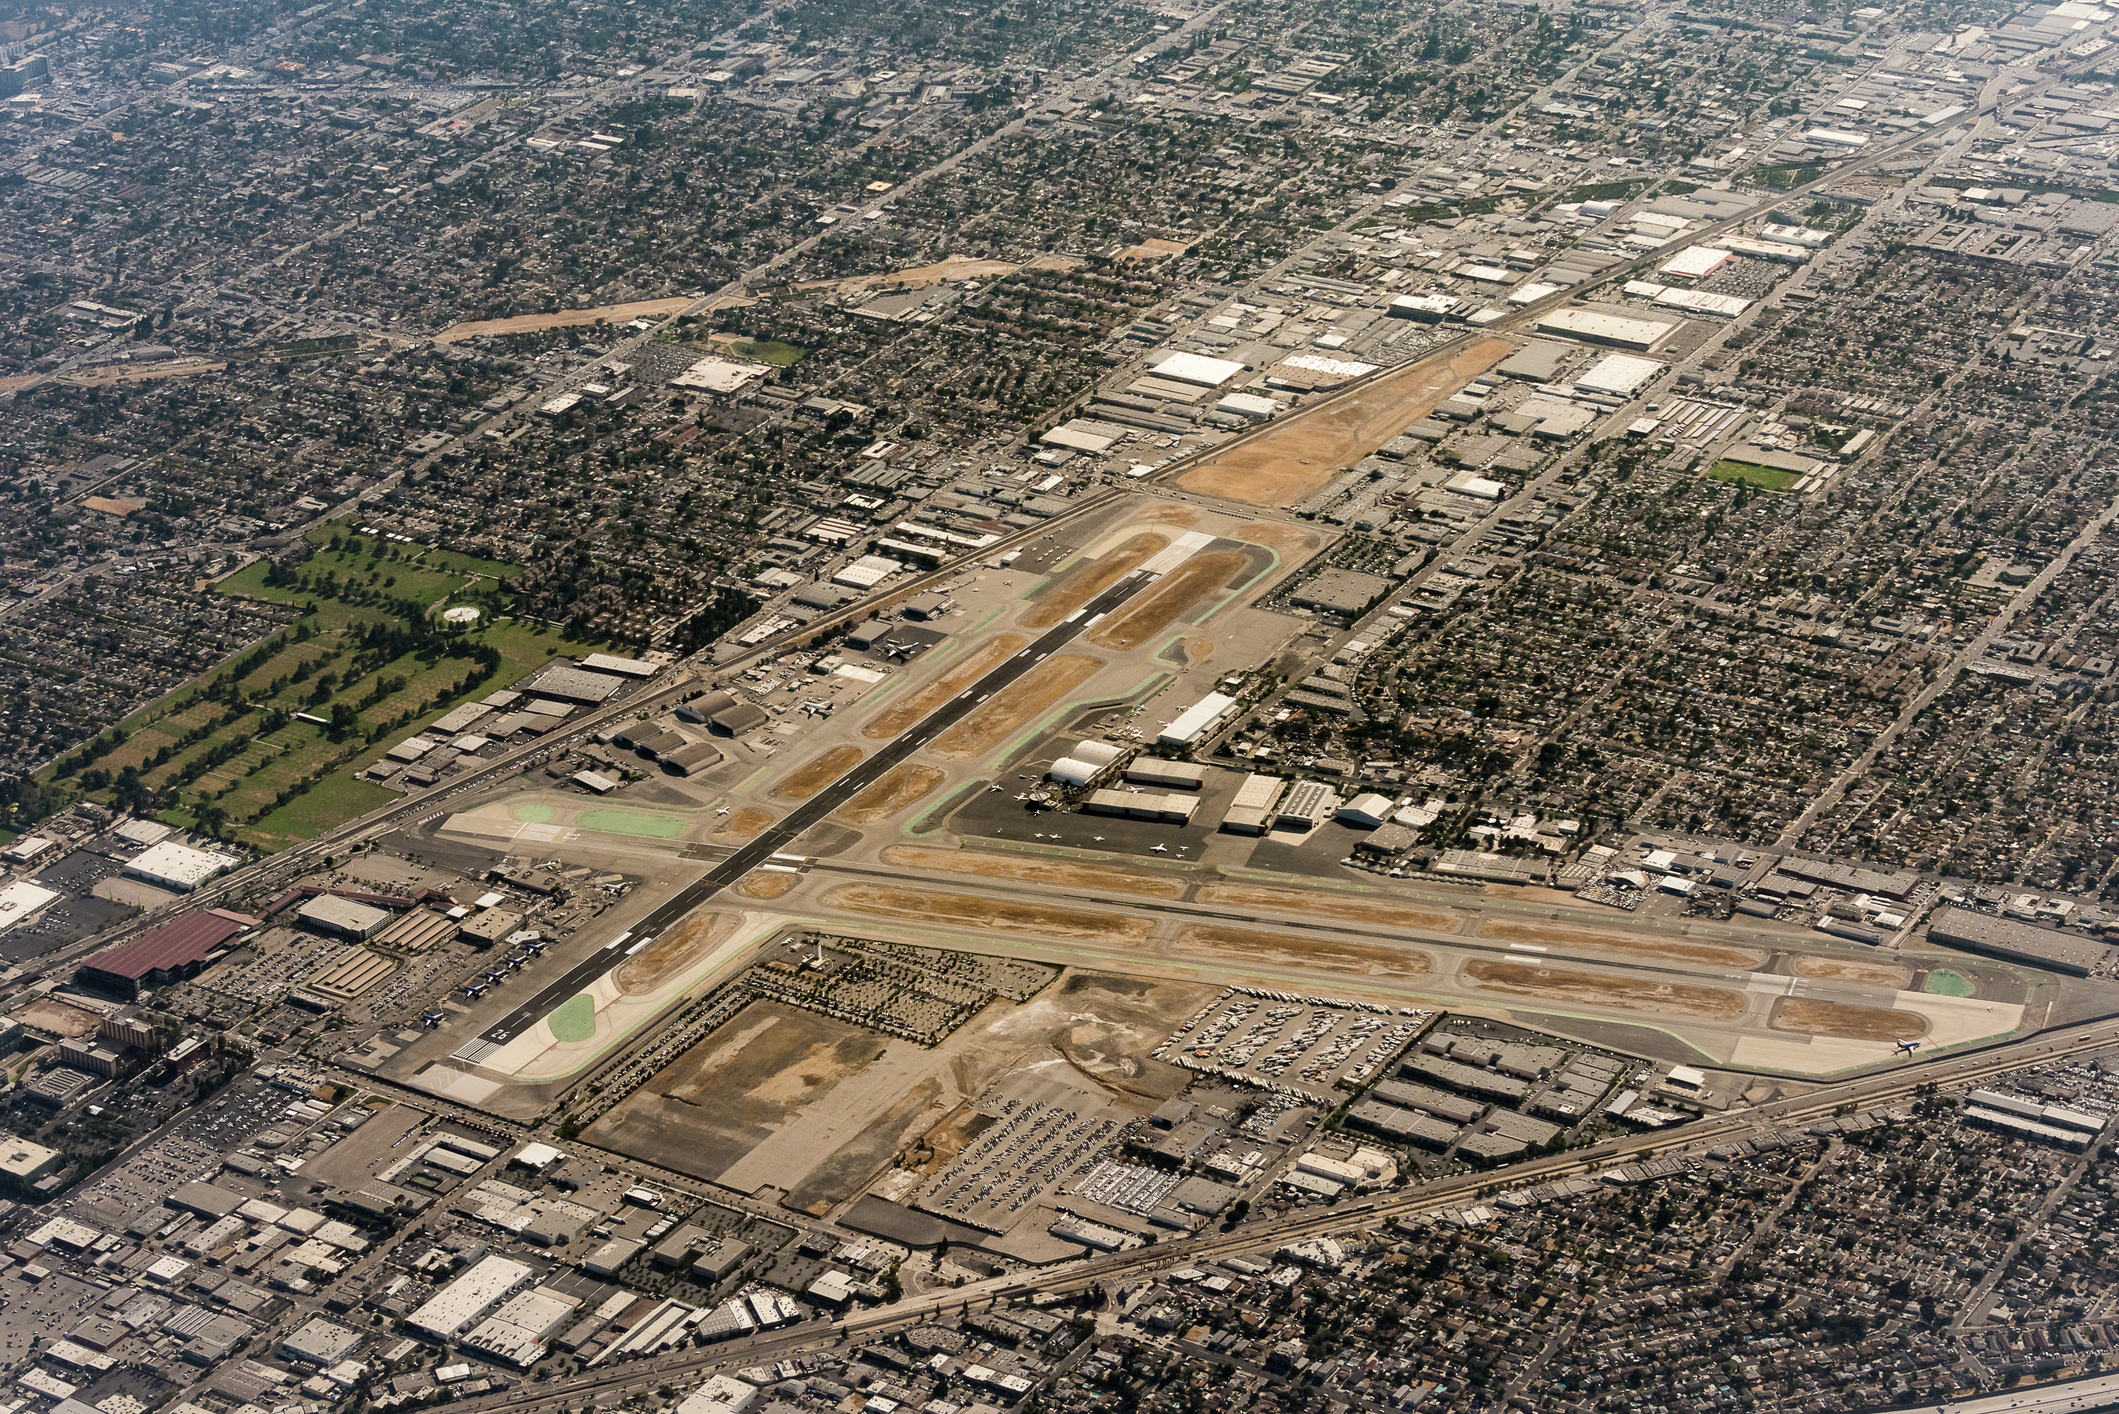 Hollywood Burbank Airport to get $8.2M grant